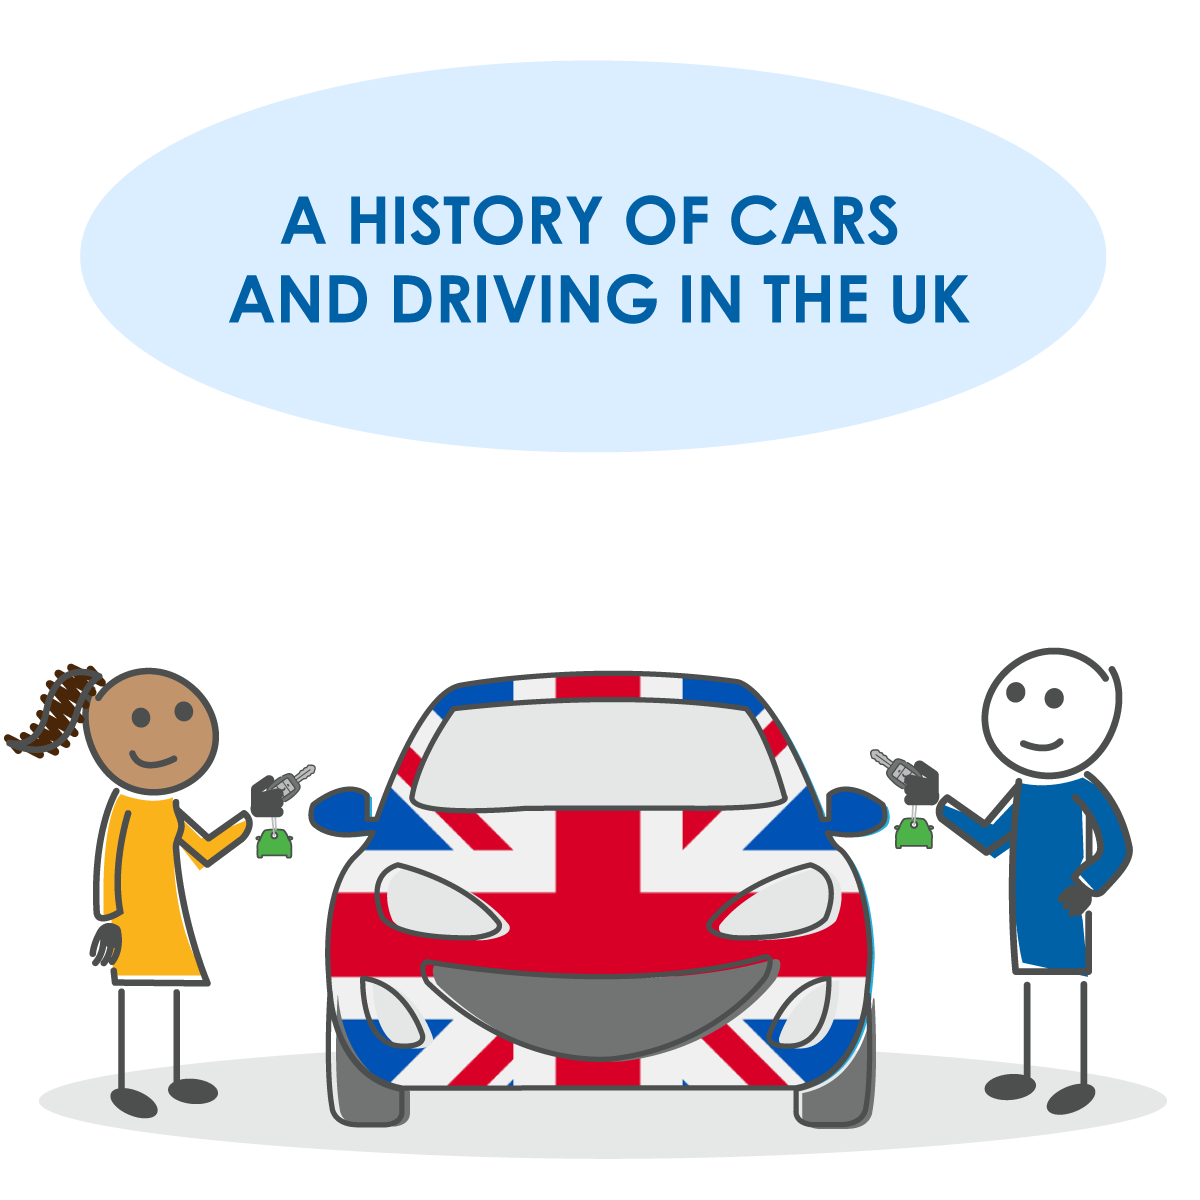 A History of Cars and Driving in the UK